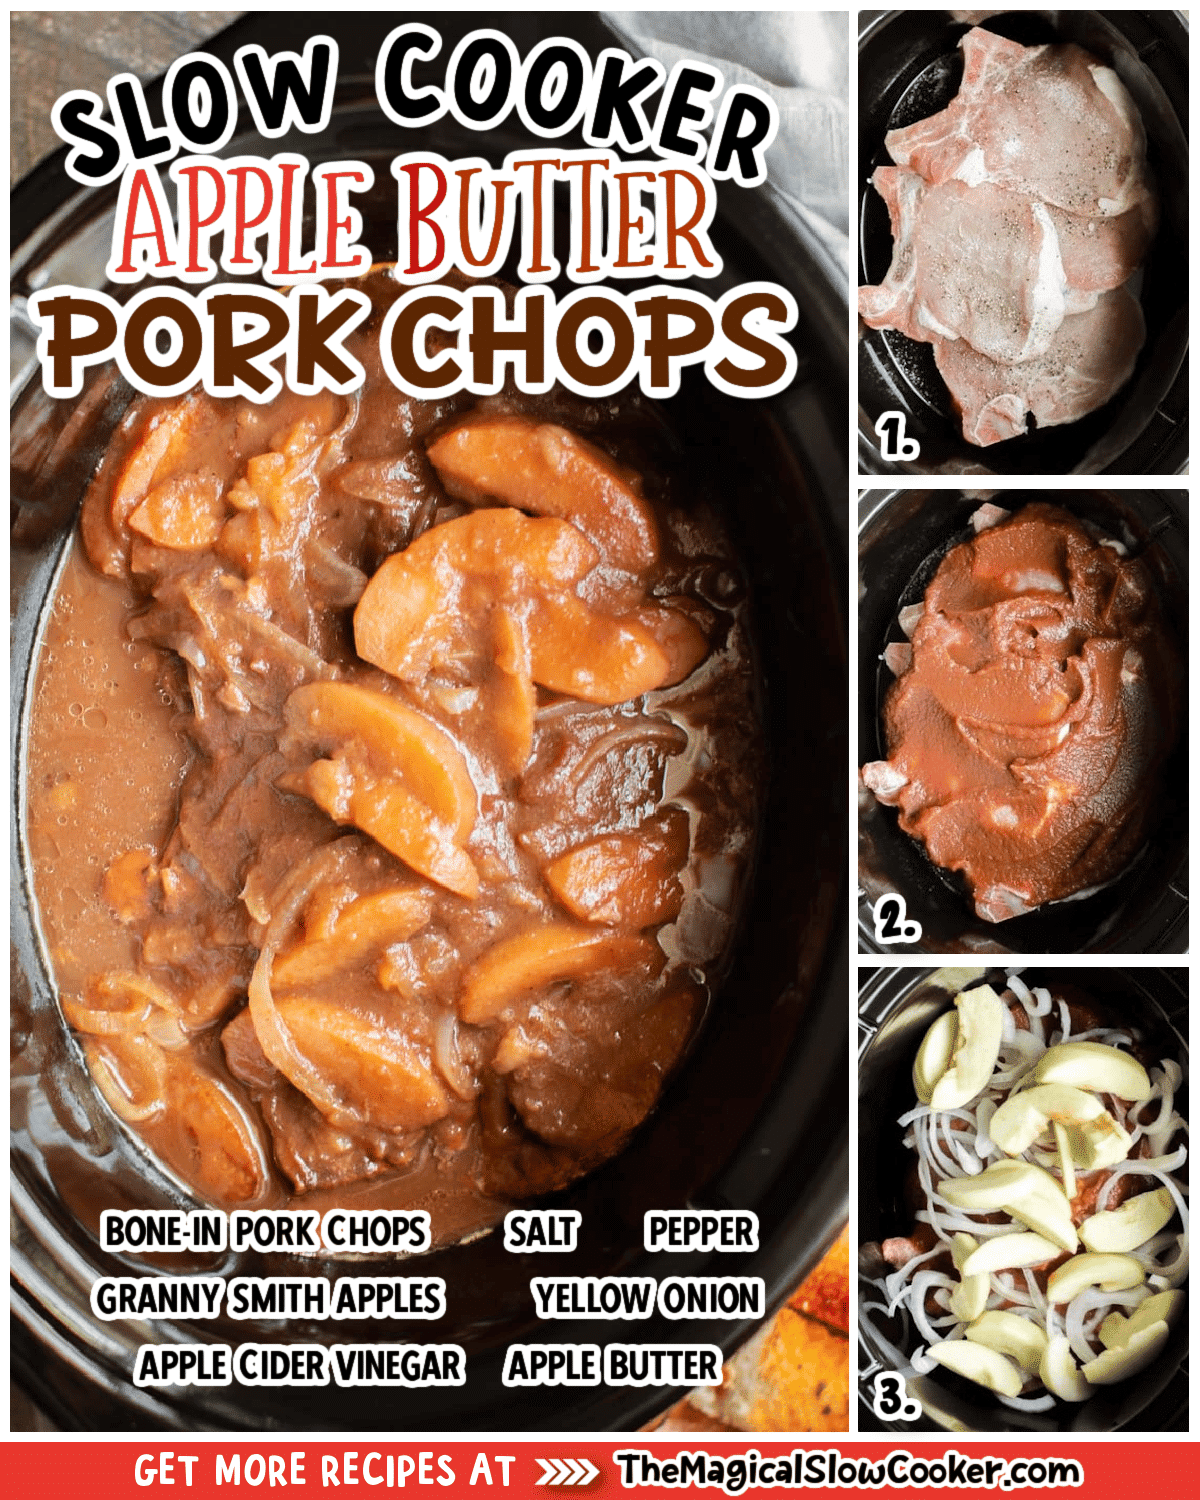 Collage of apple butter pork chop images with text of what ingredients are.